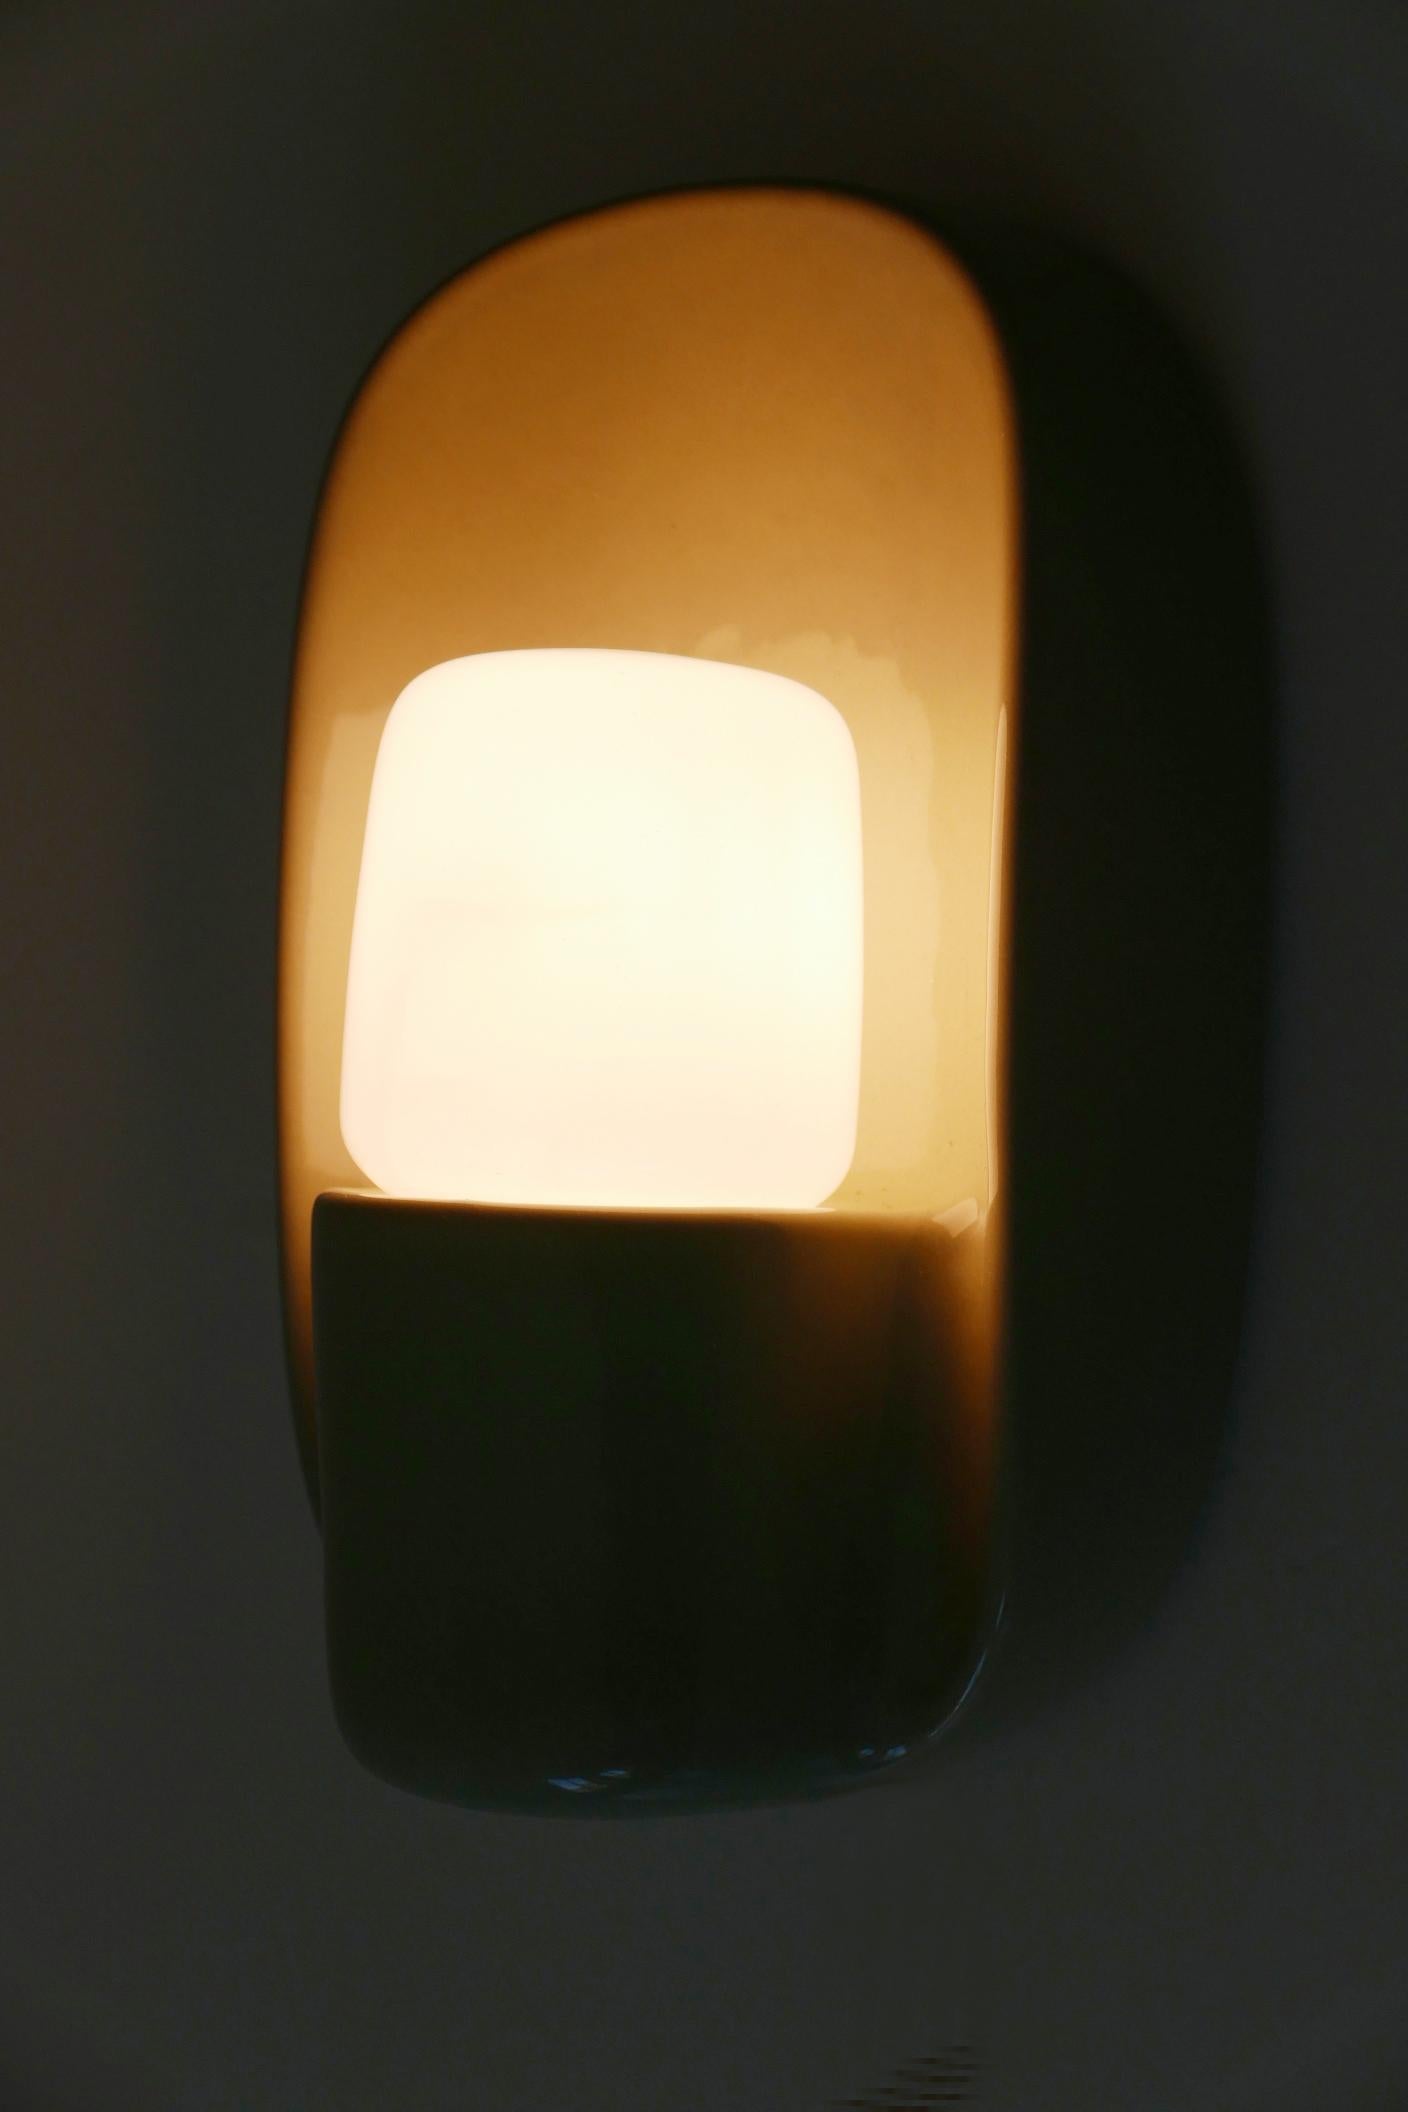 Extremely rare and elegant Mid-Century Modern systral celadon-ceramic wall lamp or sconce. Modell number '6458'. Designed in 1970 by the famous German designer Wilhelm Wagenfeld for Lindner GmbH, Germany.

Executed in glazed celadon-ceramic, it